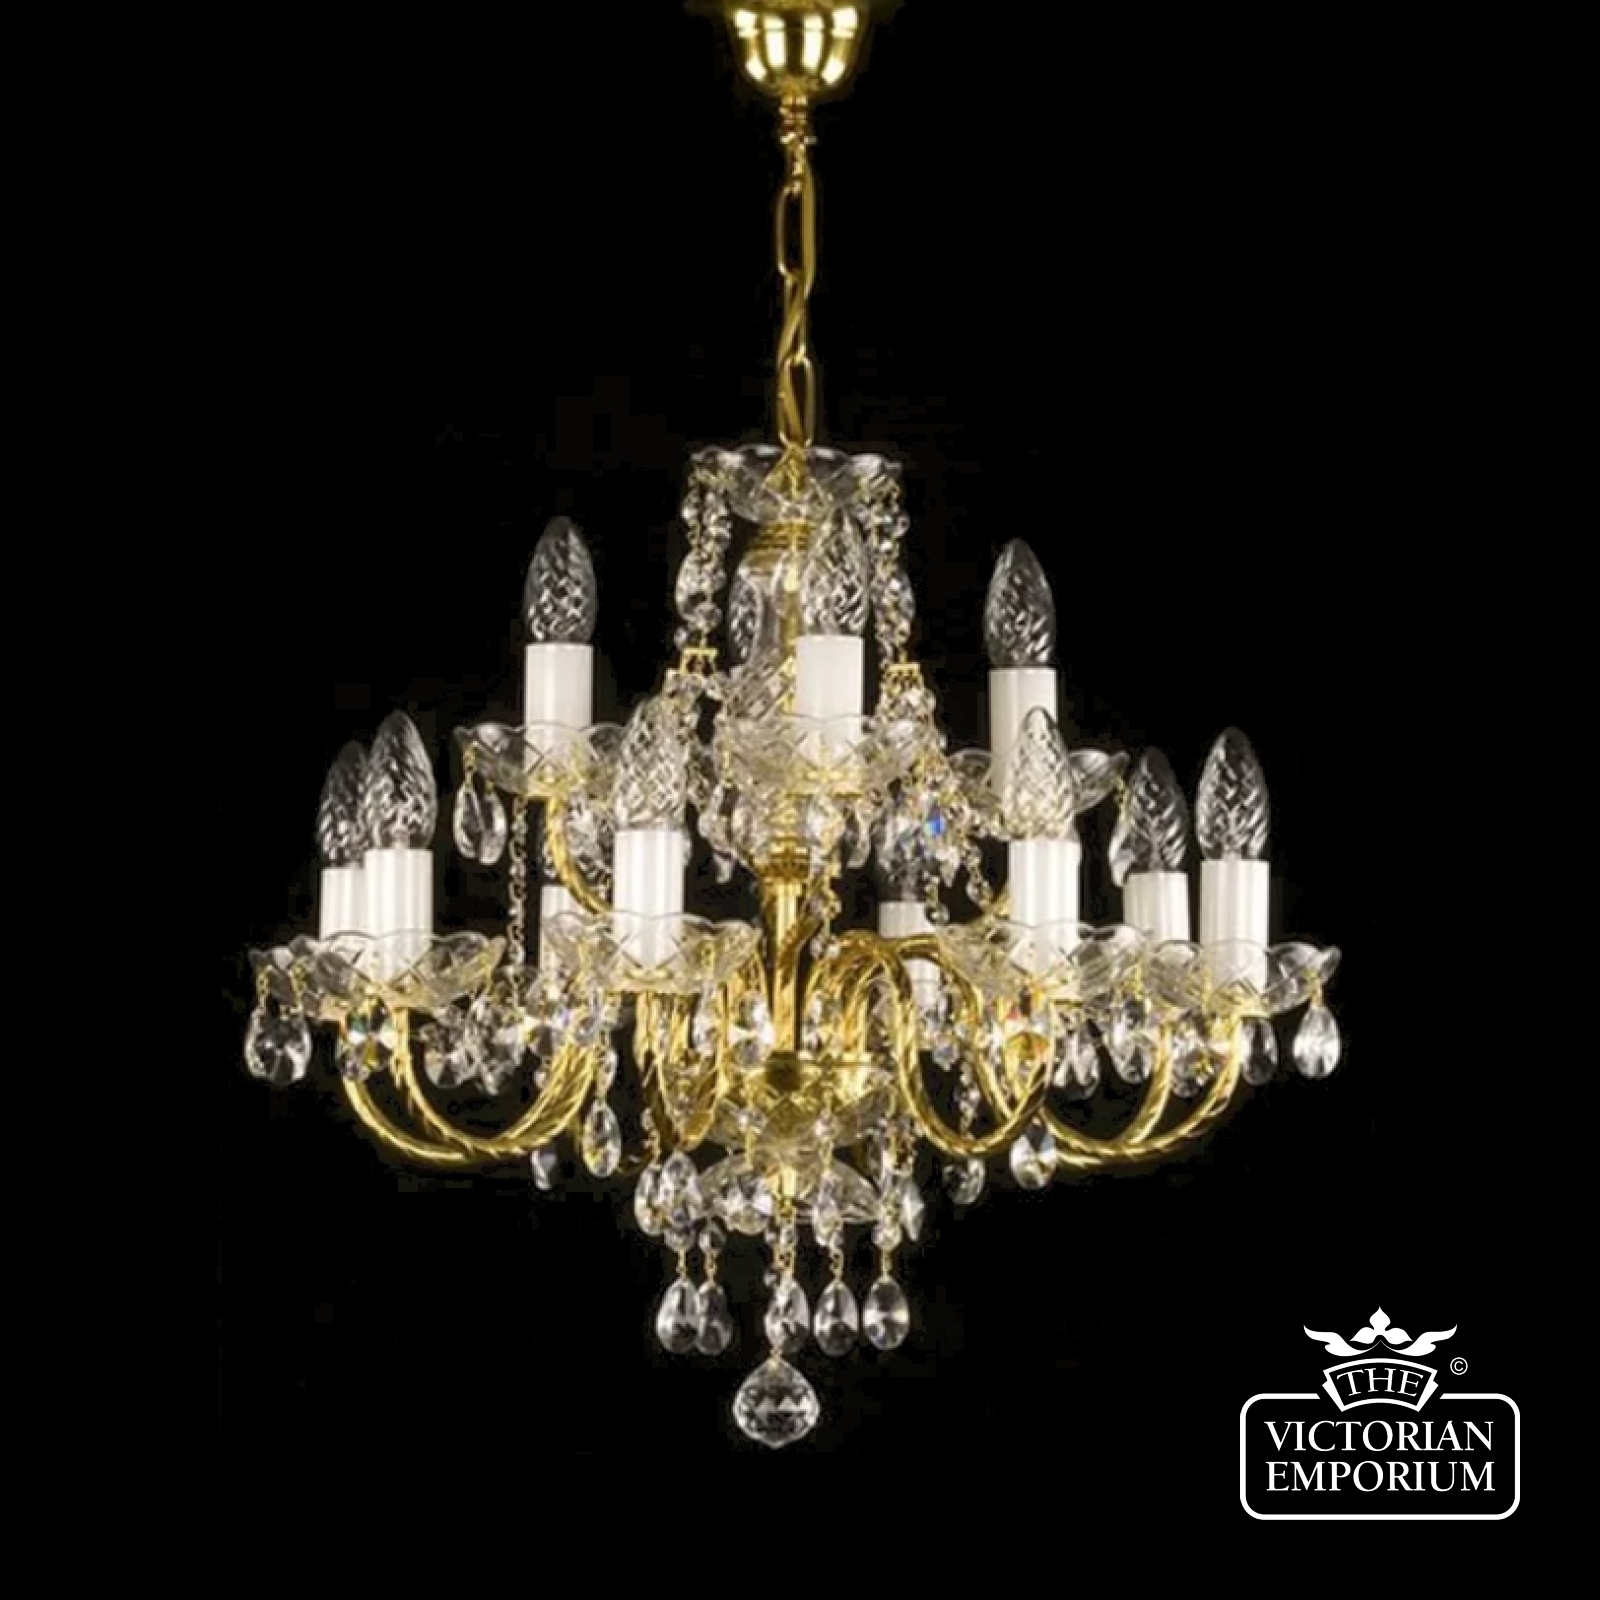 Adele 12 Arm Chandelier With Gold-rimmed Arms And Oval-shaped Crystals